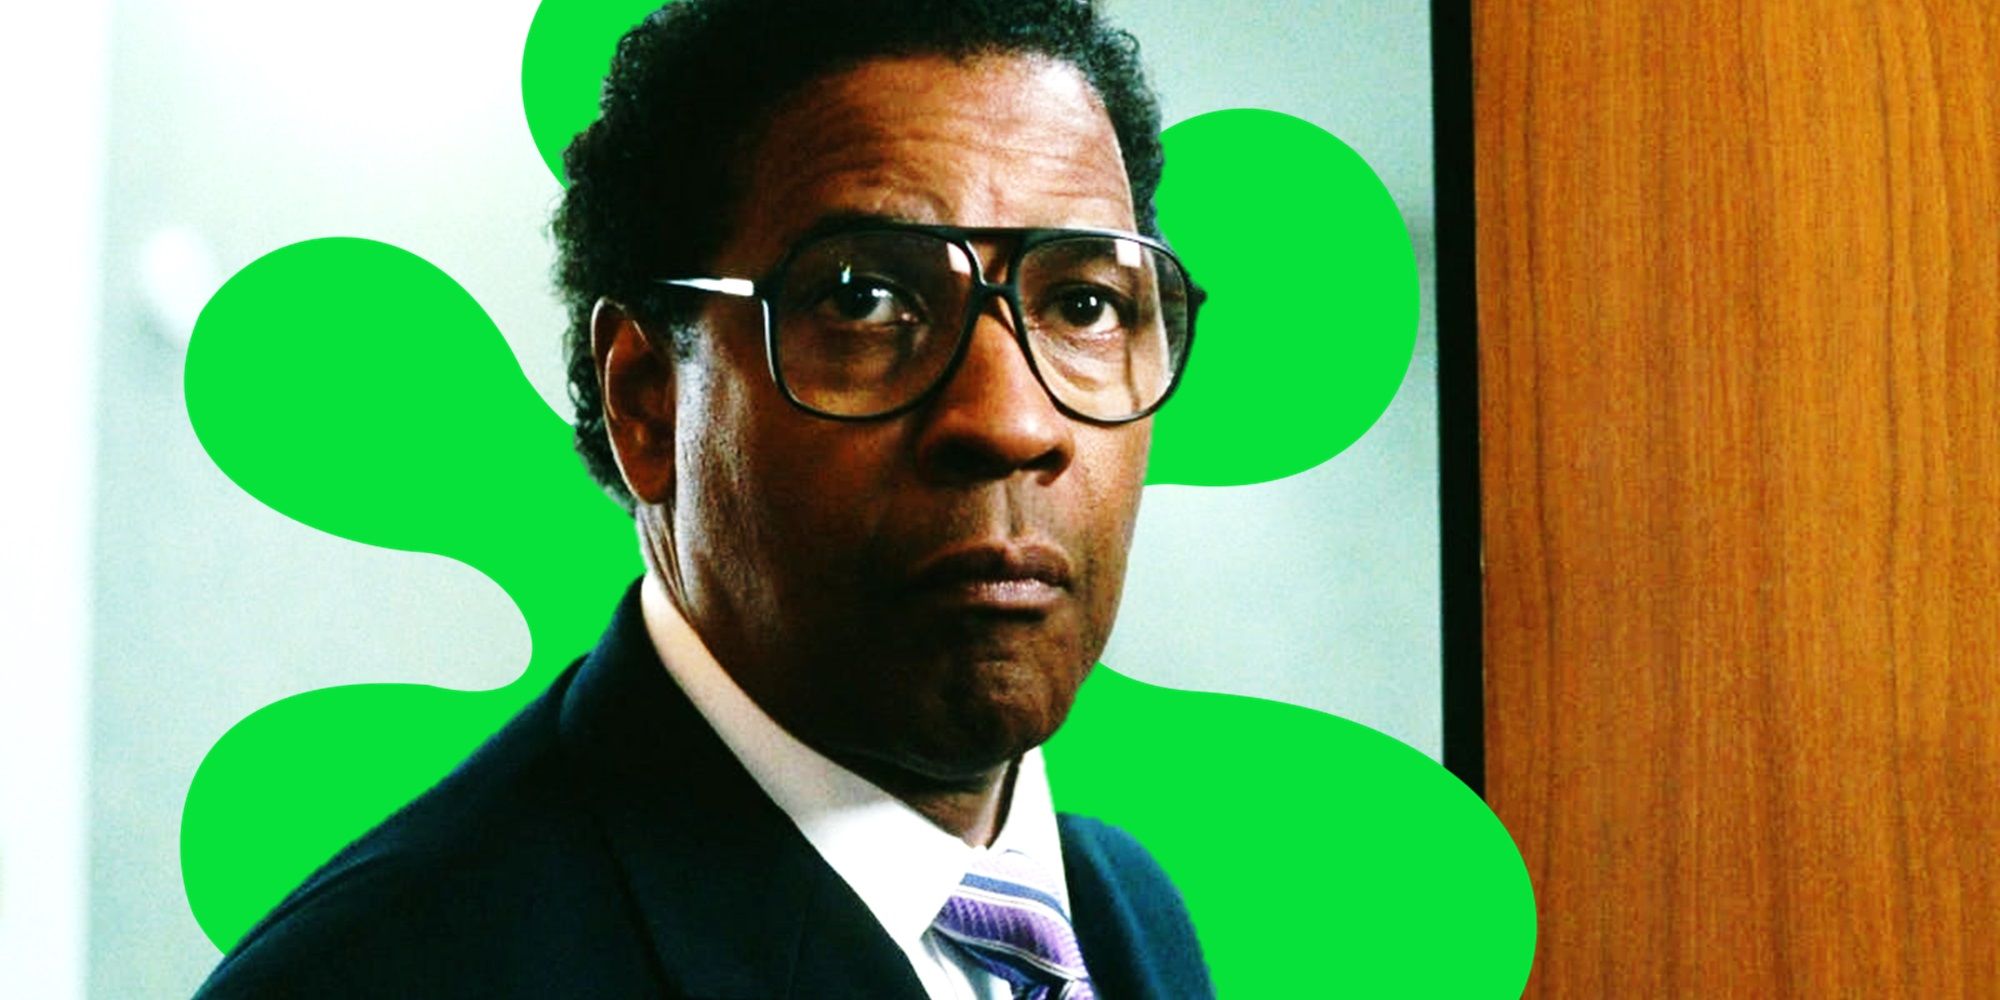 This Denzel Washington Movie With 55% On RT Is The Only One In The Last 10 Years Critics & Audiences Agree Was "Rotten"